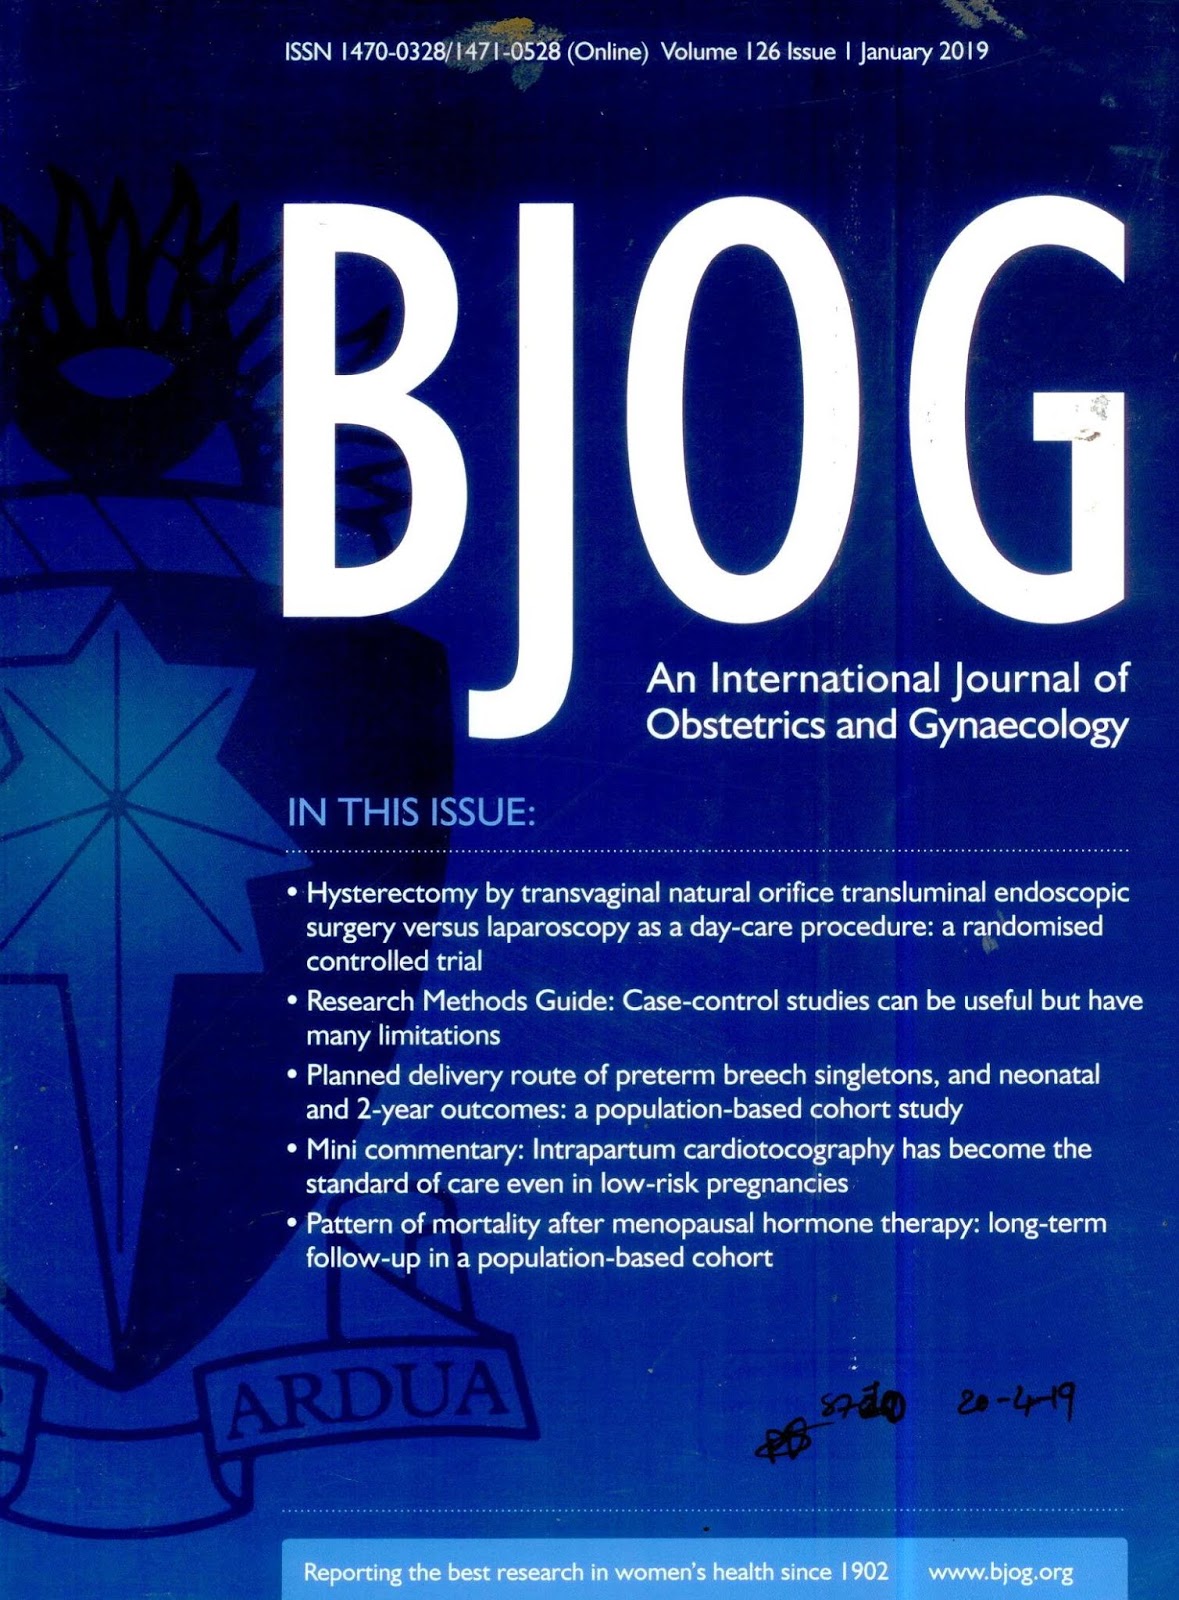 https://obgyn.onlinelibrary.wiley.com/toc/14710528/2019/126/1